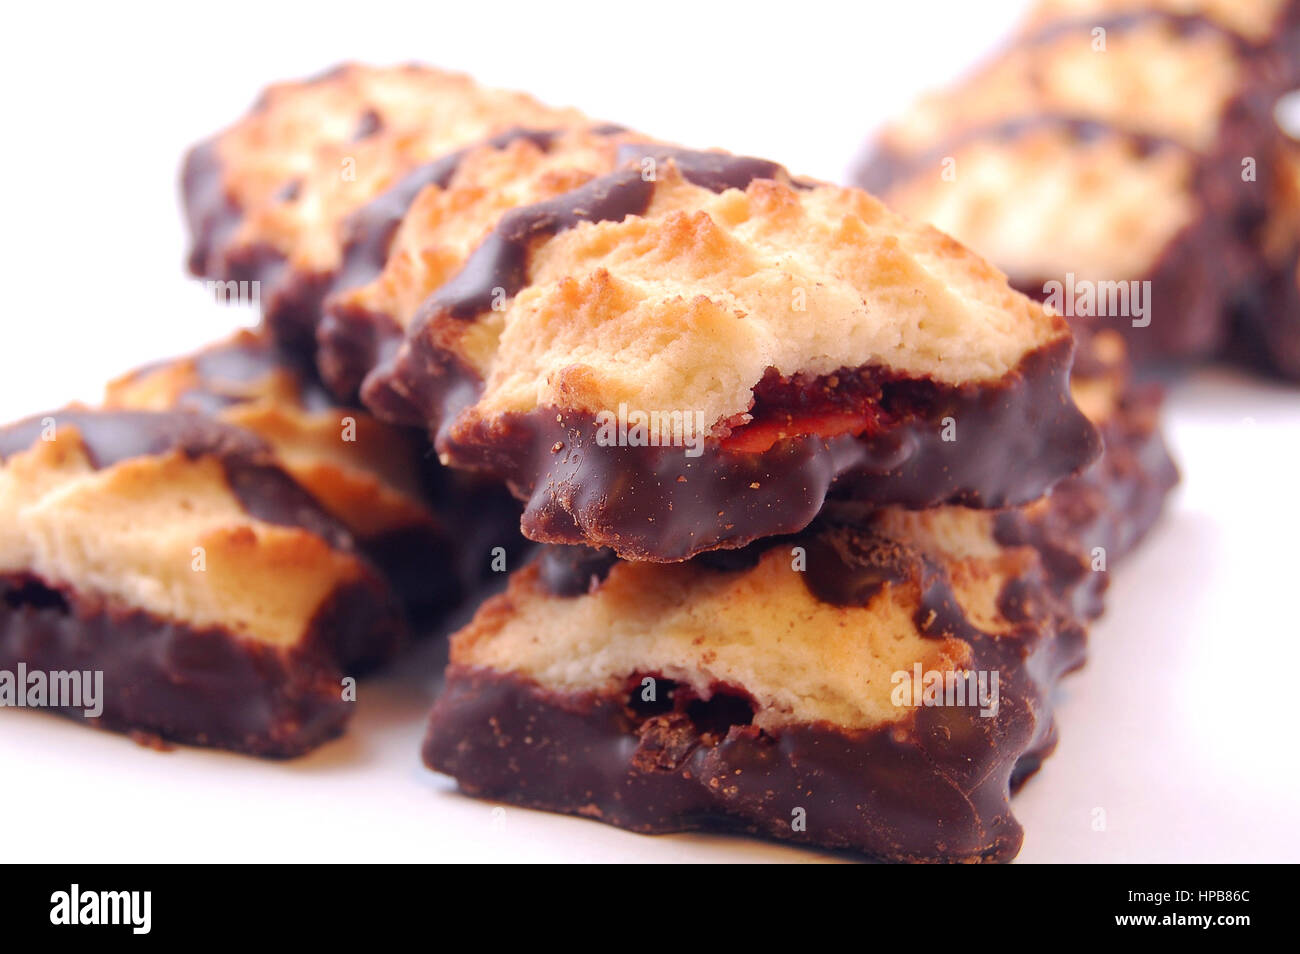 Pile of shortbread cookies with jam and chocolate icing on white background. Stock Photo